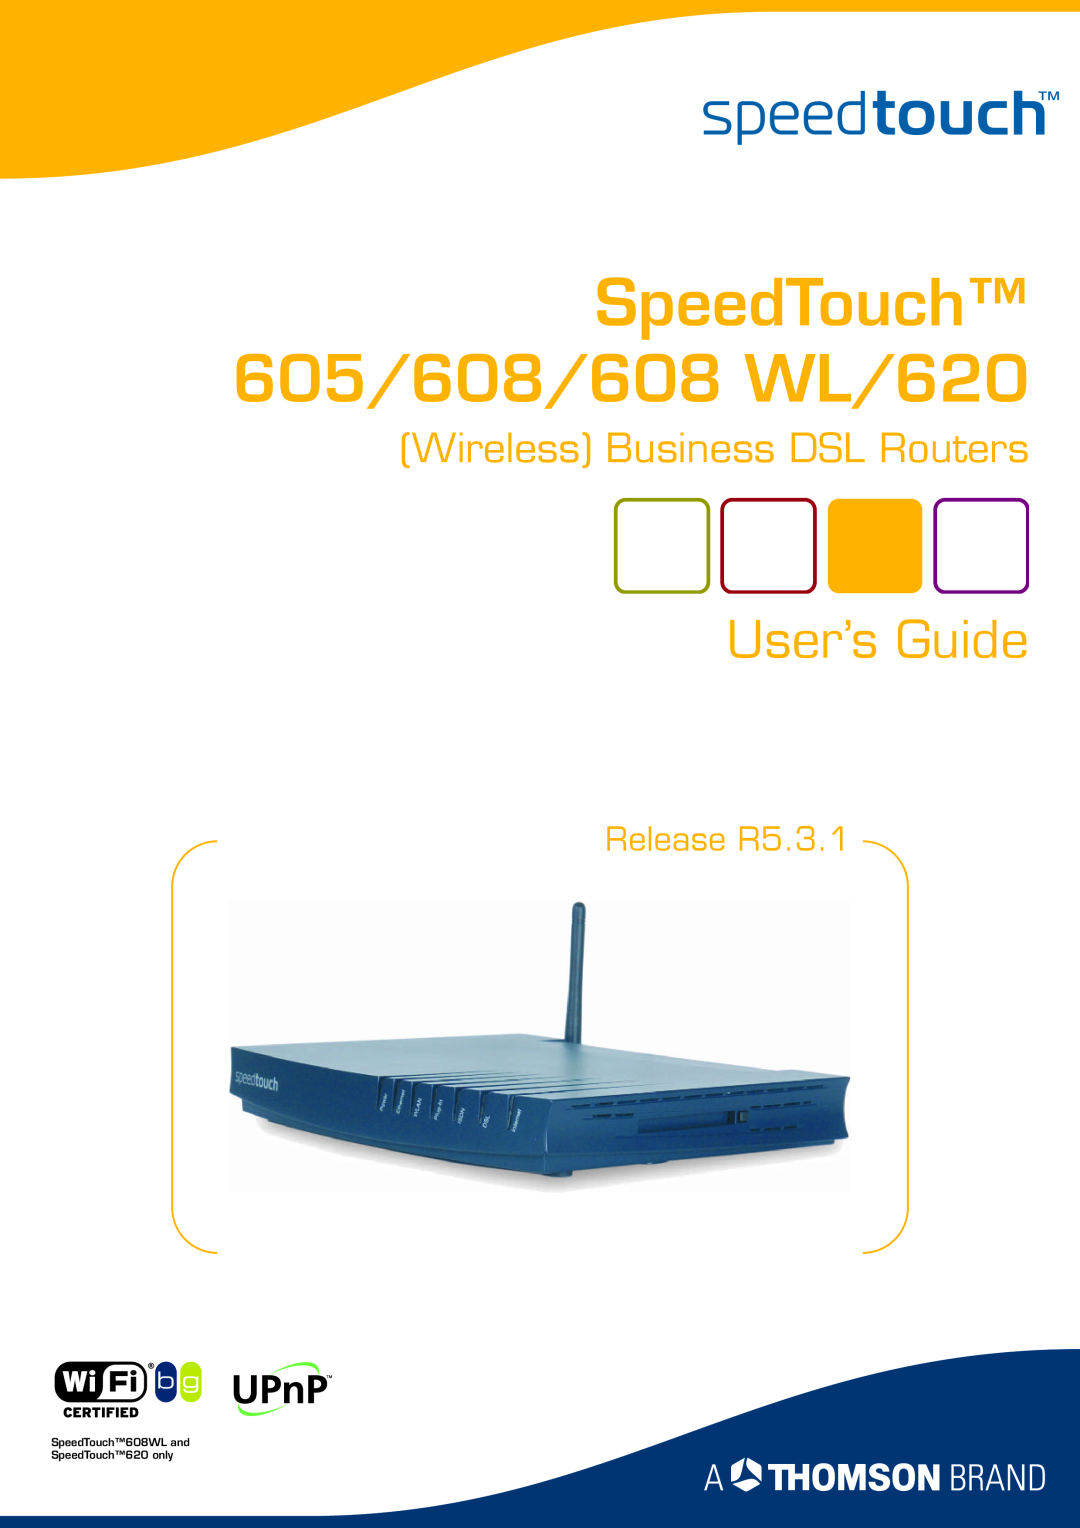 Technicolor - Thomson manual SpeedTouch 605/608/608 WL/620, User’s Guide, Wireless Business DSL Routers, Release R5.3.1 